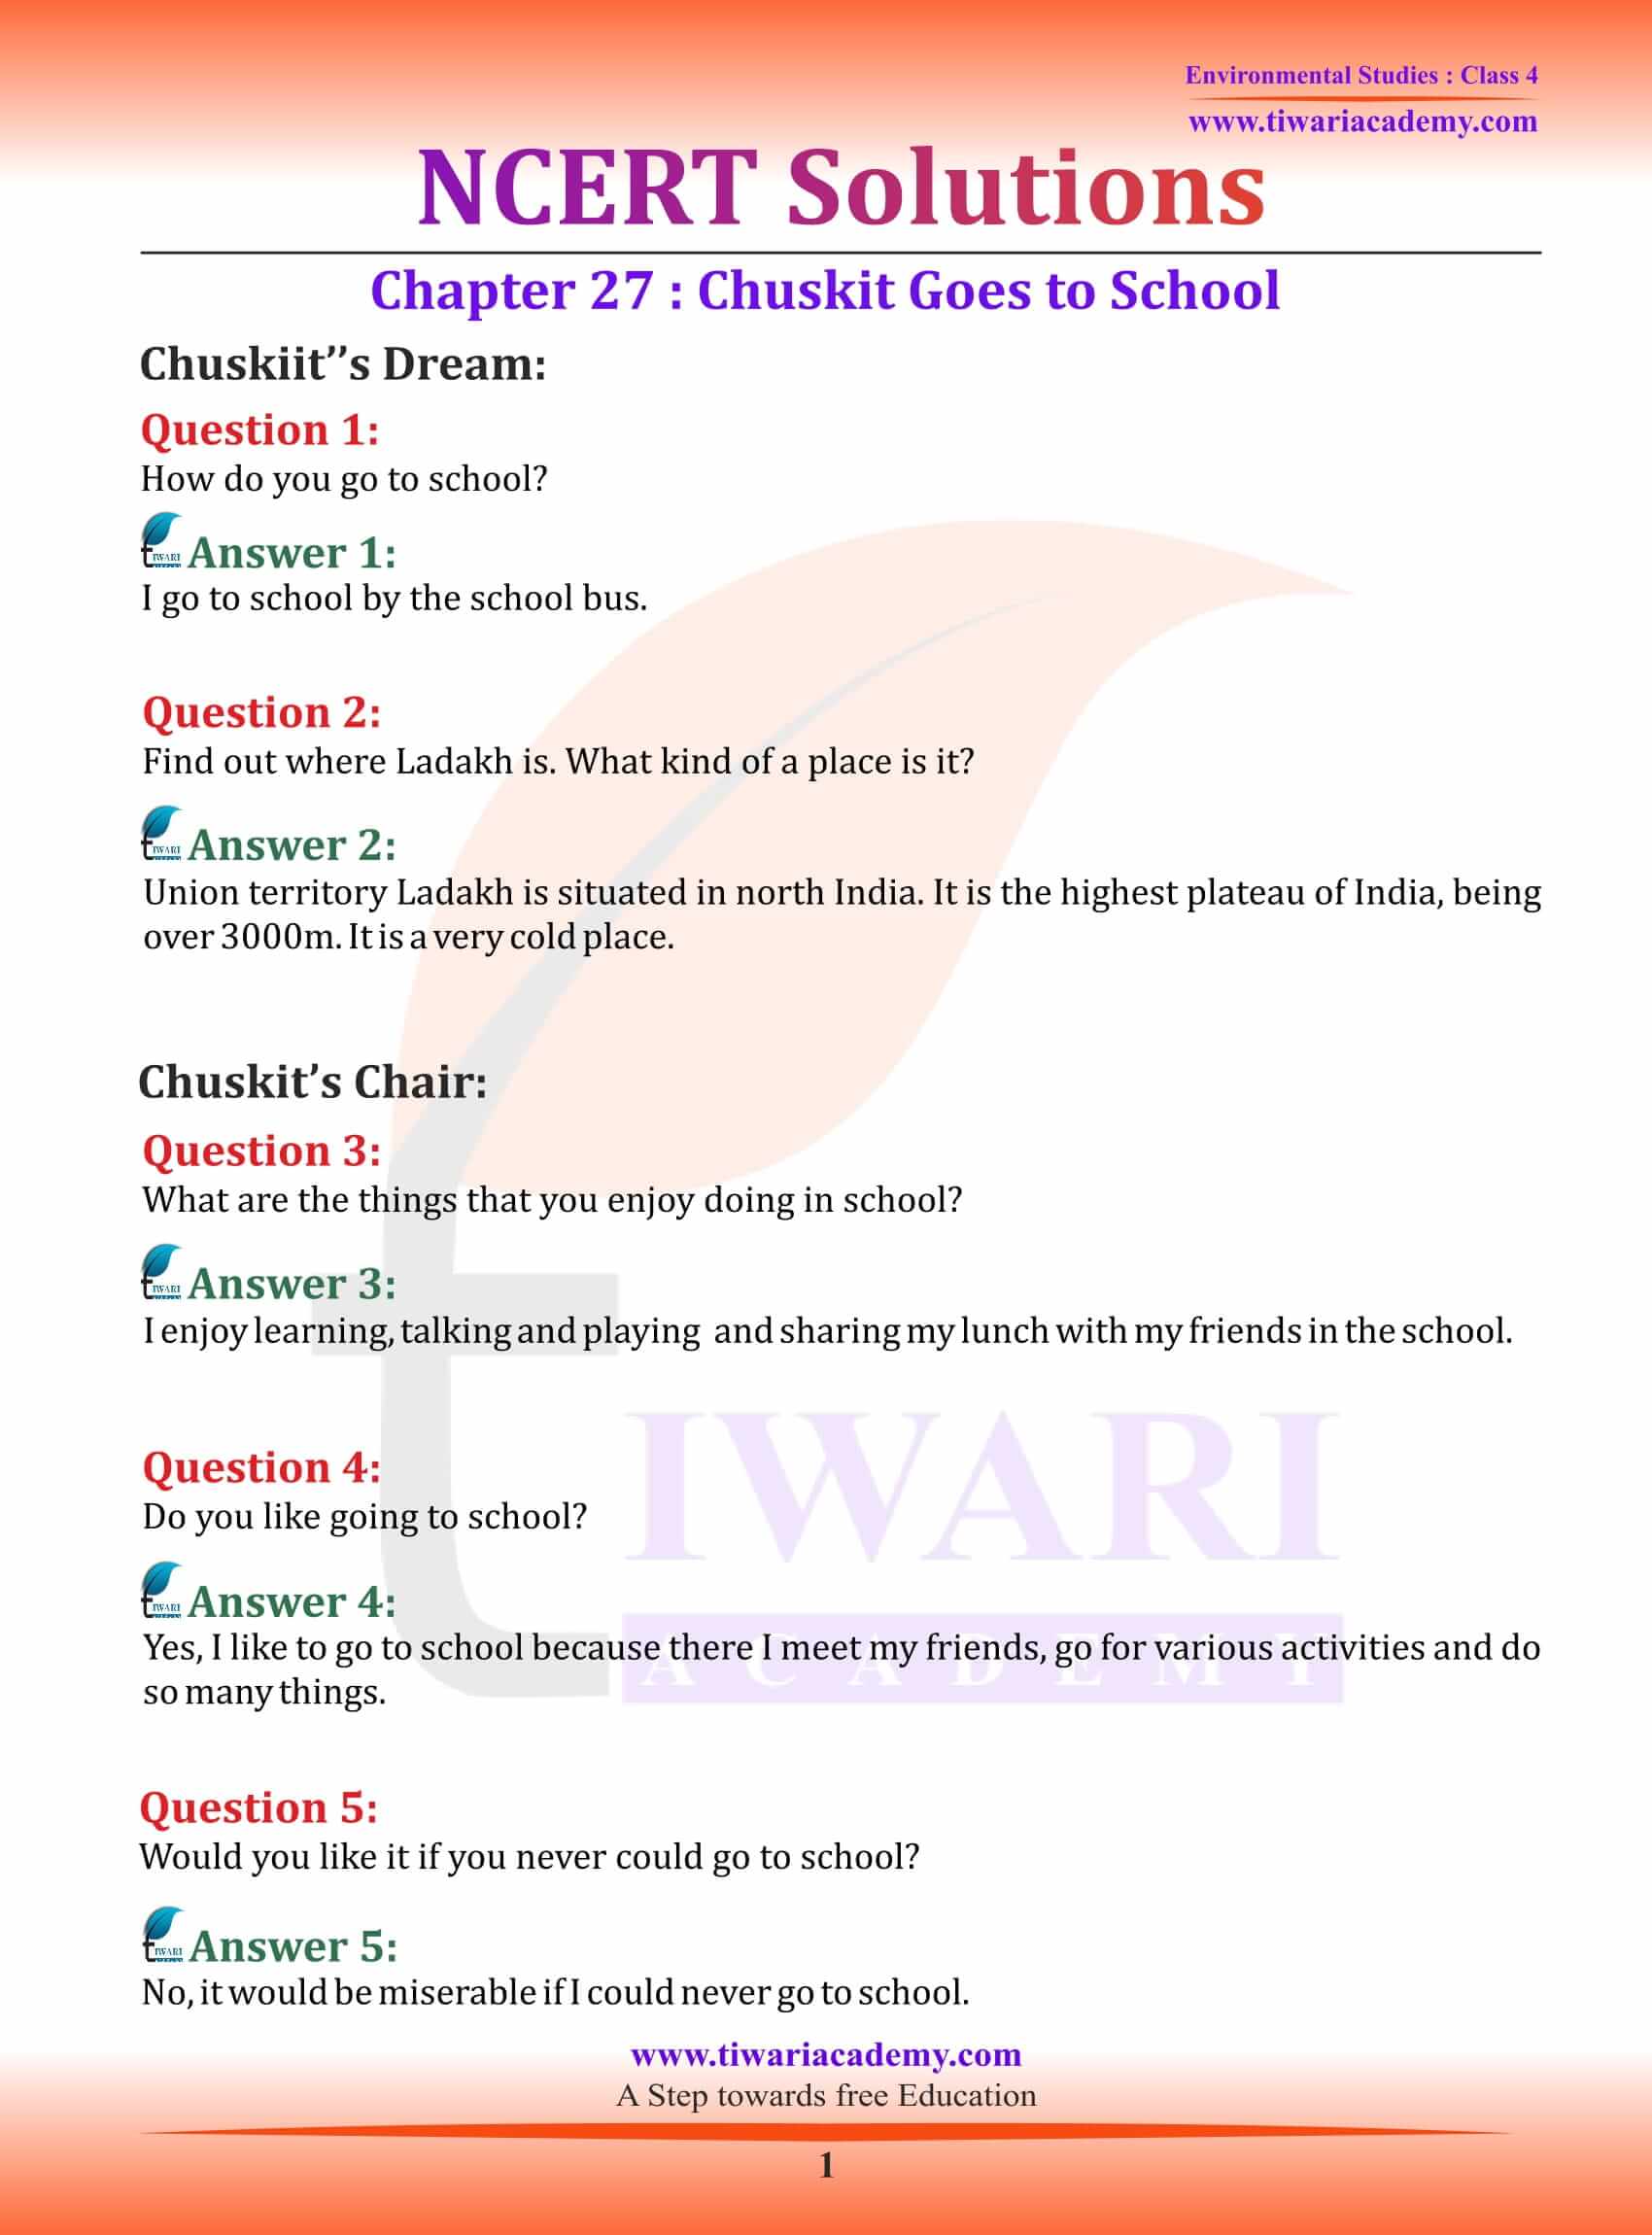 NCERT Solutions for Class 4 EVS Chapter 27 Chuskit Goes to School